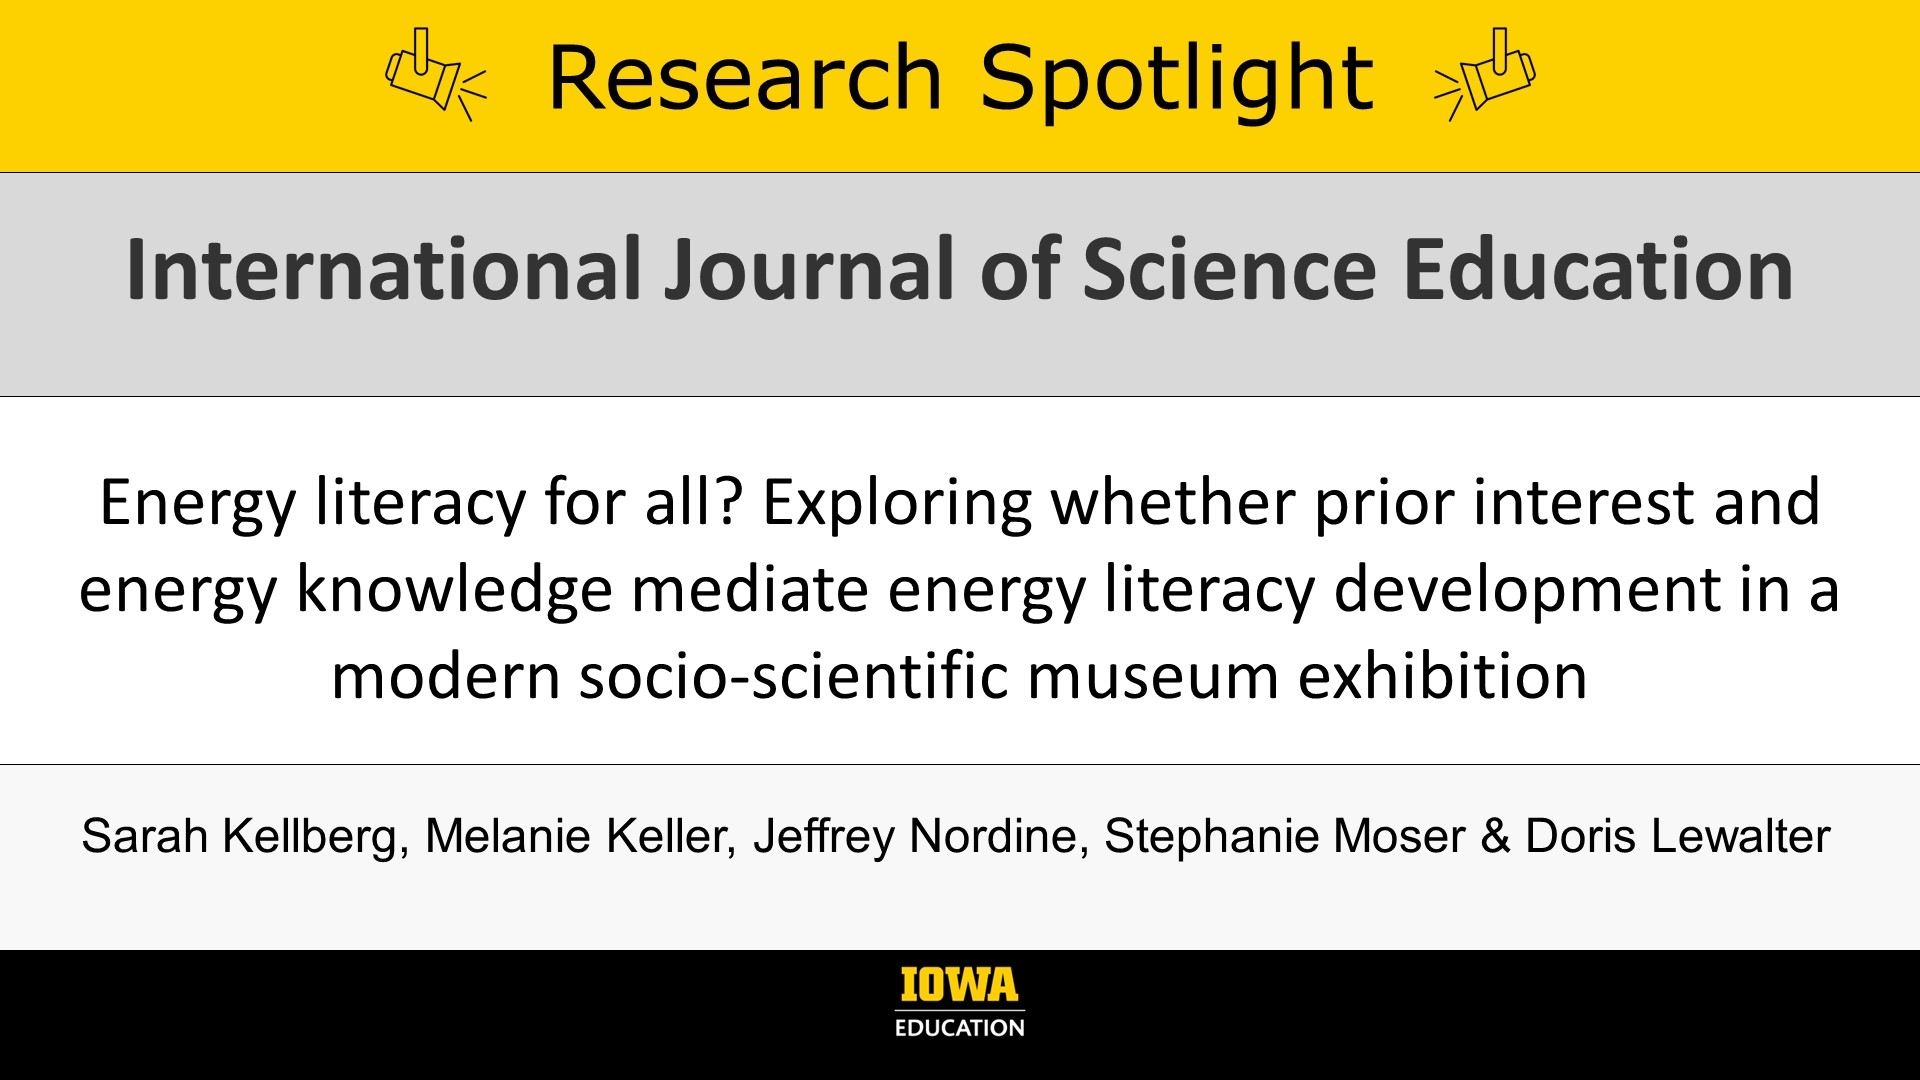 Research Spotlight: Energy literacy for all? Exploring whether prior interest and energy knowledge mediate energy literacy development in a modern socio-scientific museum exhibition. In International Journal of Science Education